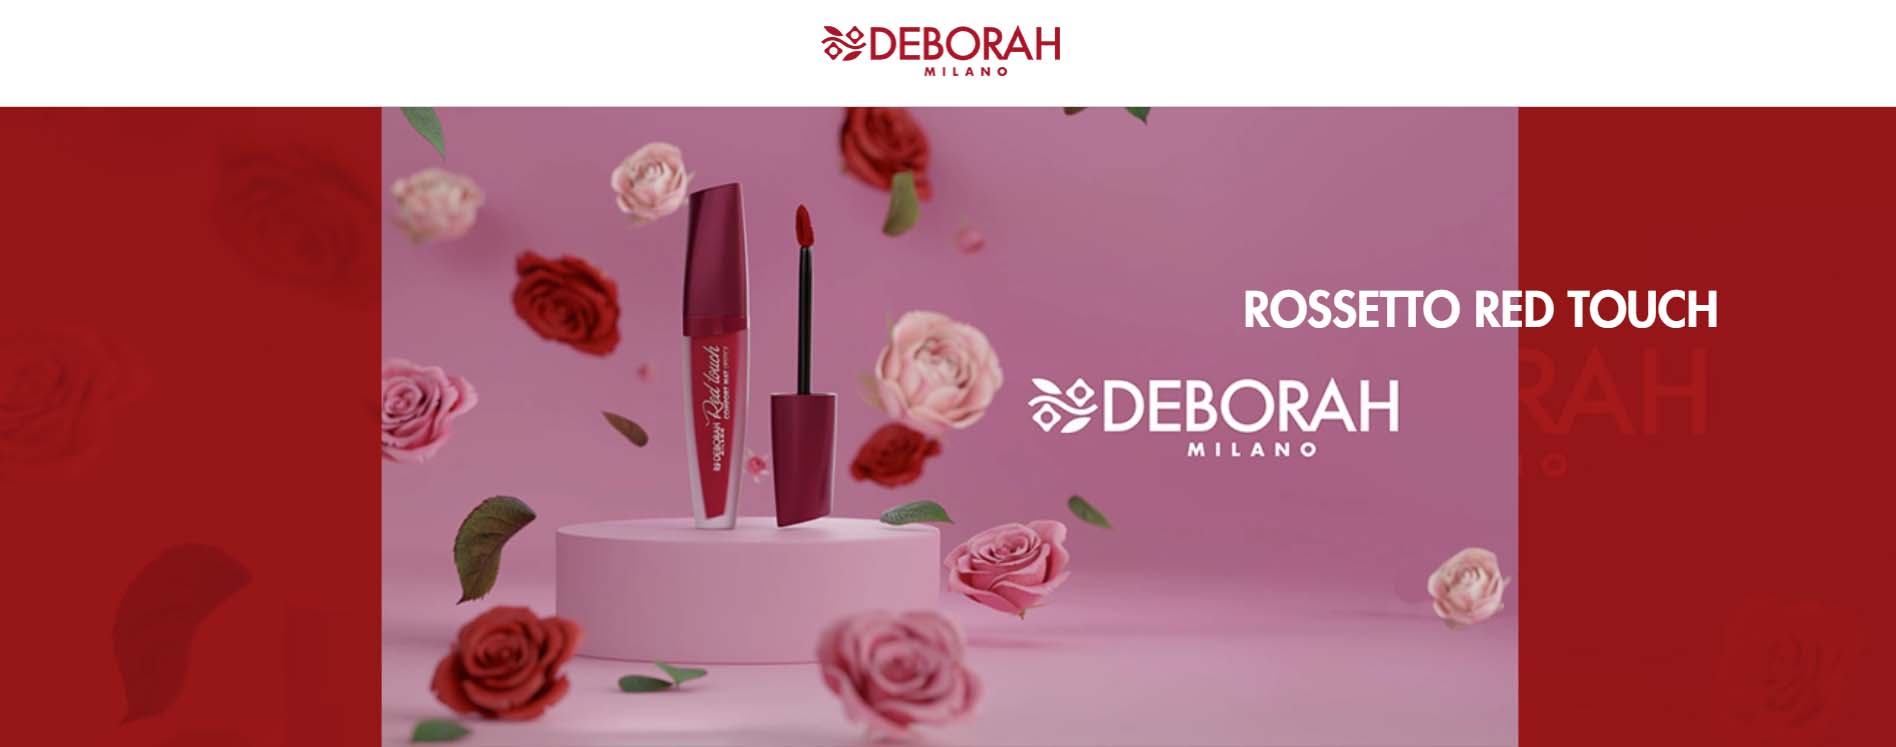 rossetto-red-touch-cartello